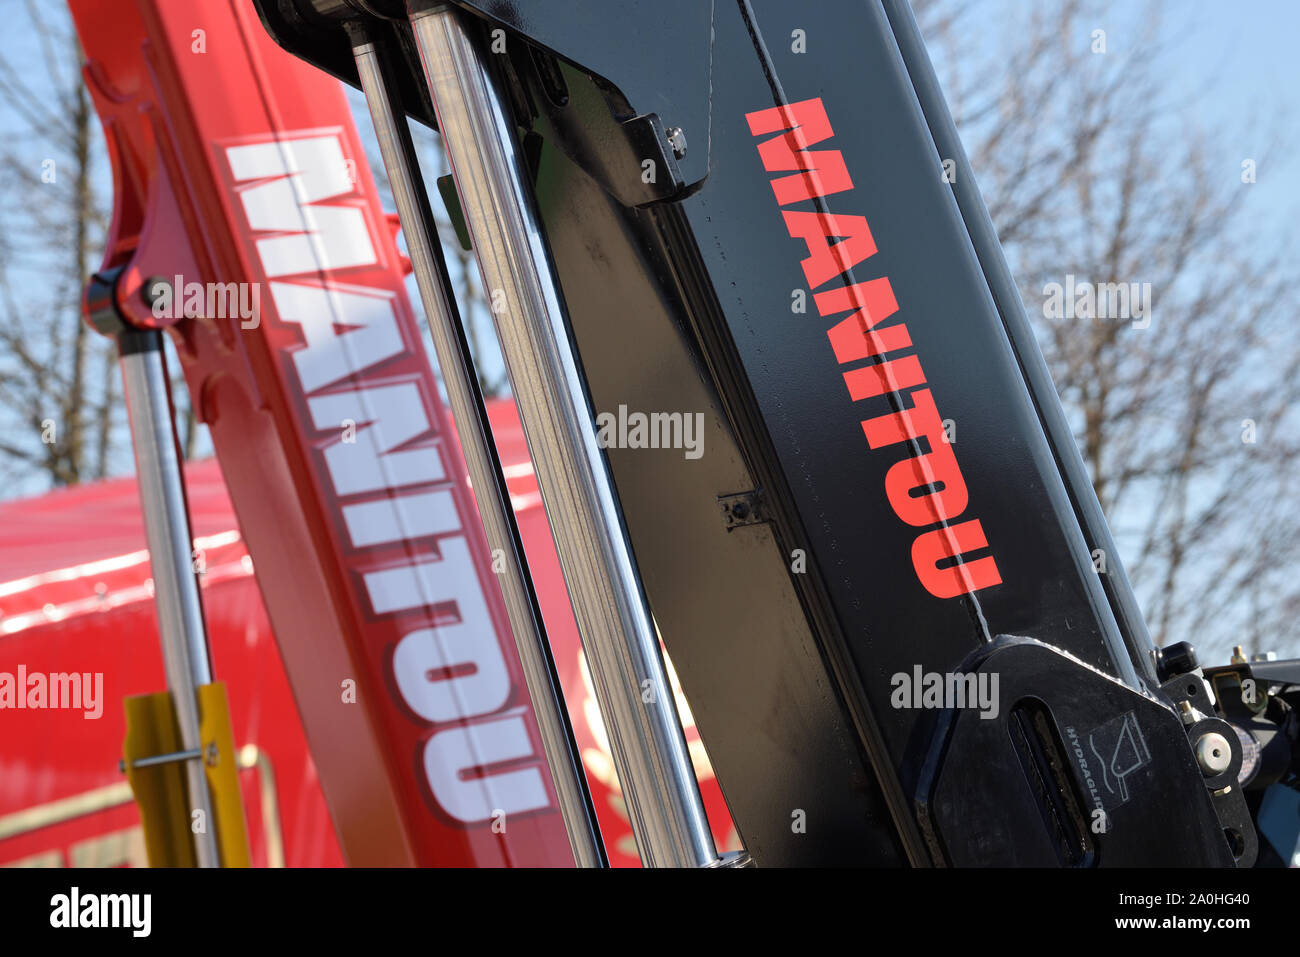 Kaunas, Lithuania - April 04: Manitou forklift tractor detail and logo in Kaunas on April 04, 2019. Manitou is a firm that makes fork lifts, cherry pi Stock Photo